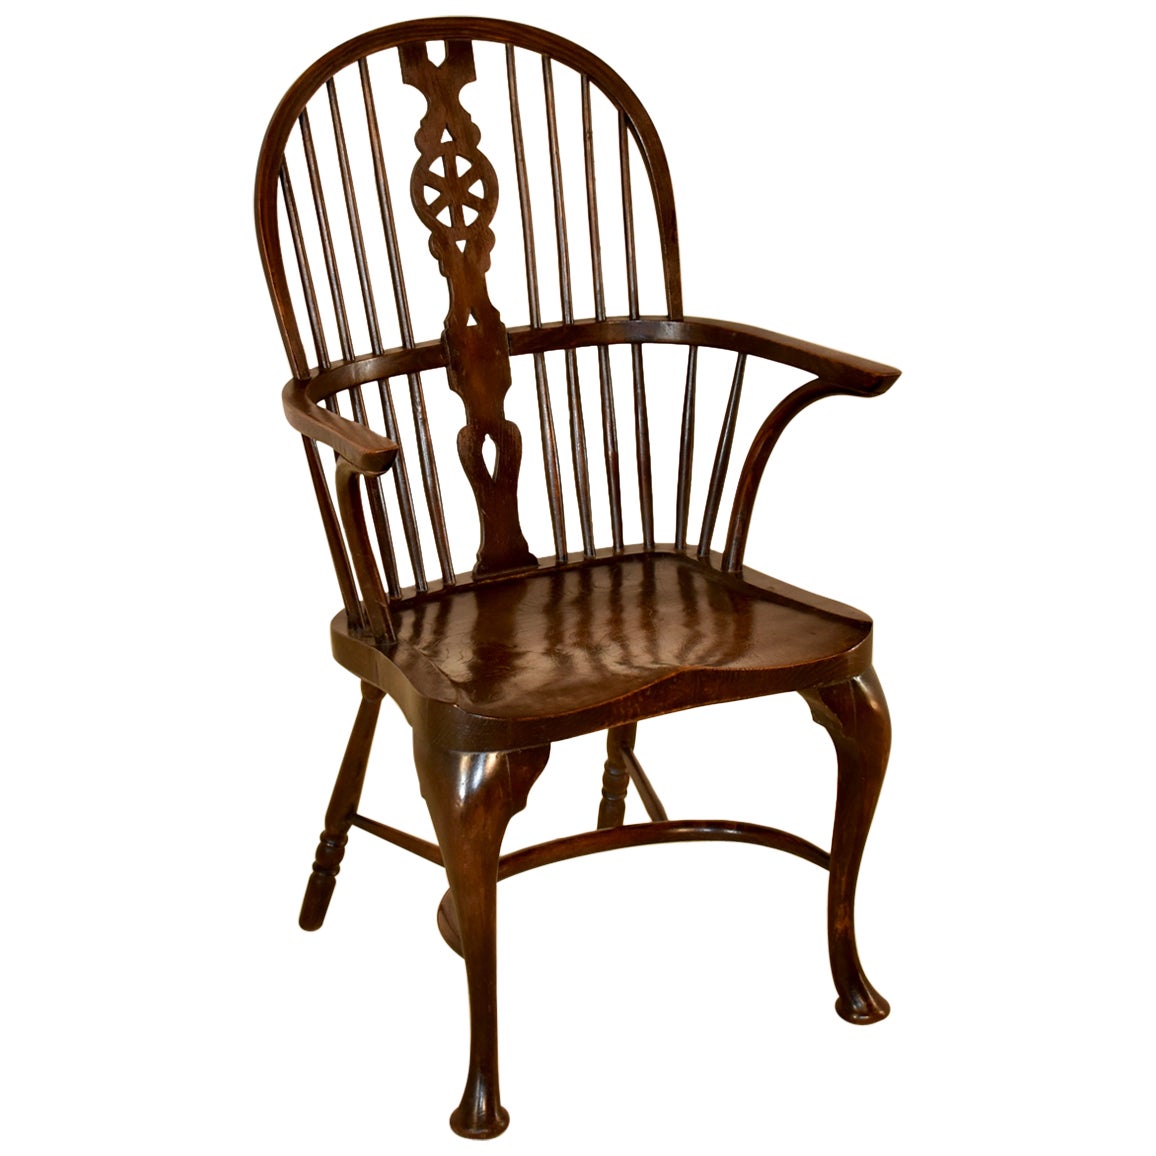 Circa 1900 English Double Bow Windsor Chair For Sale